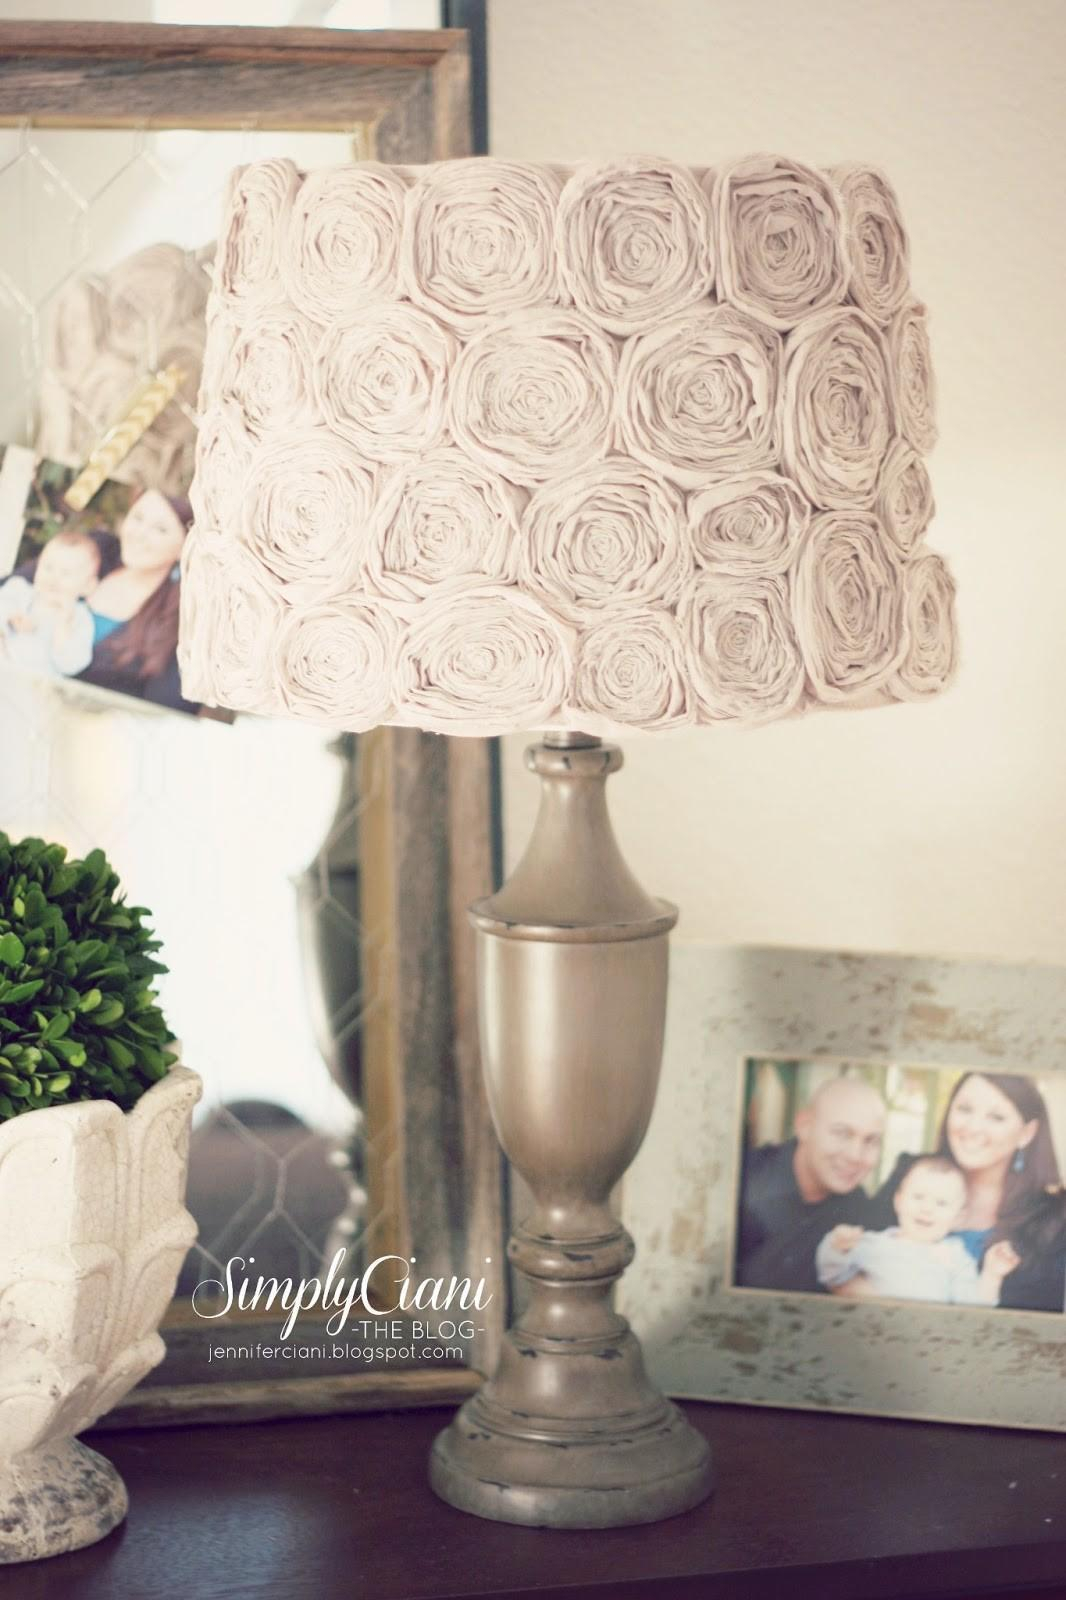 Shabby Chic Look With Handmade Rosettes Extra Appealing DIY Lampshades To Brighten Up Your Room Every Day